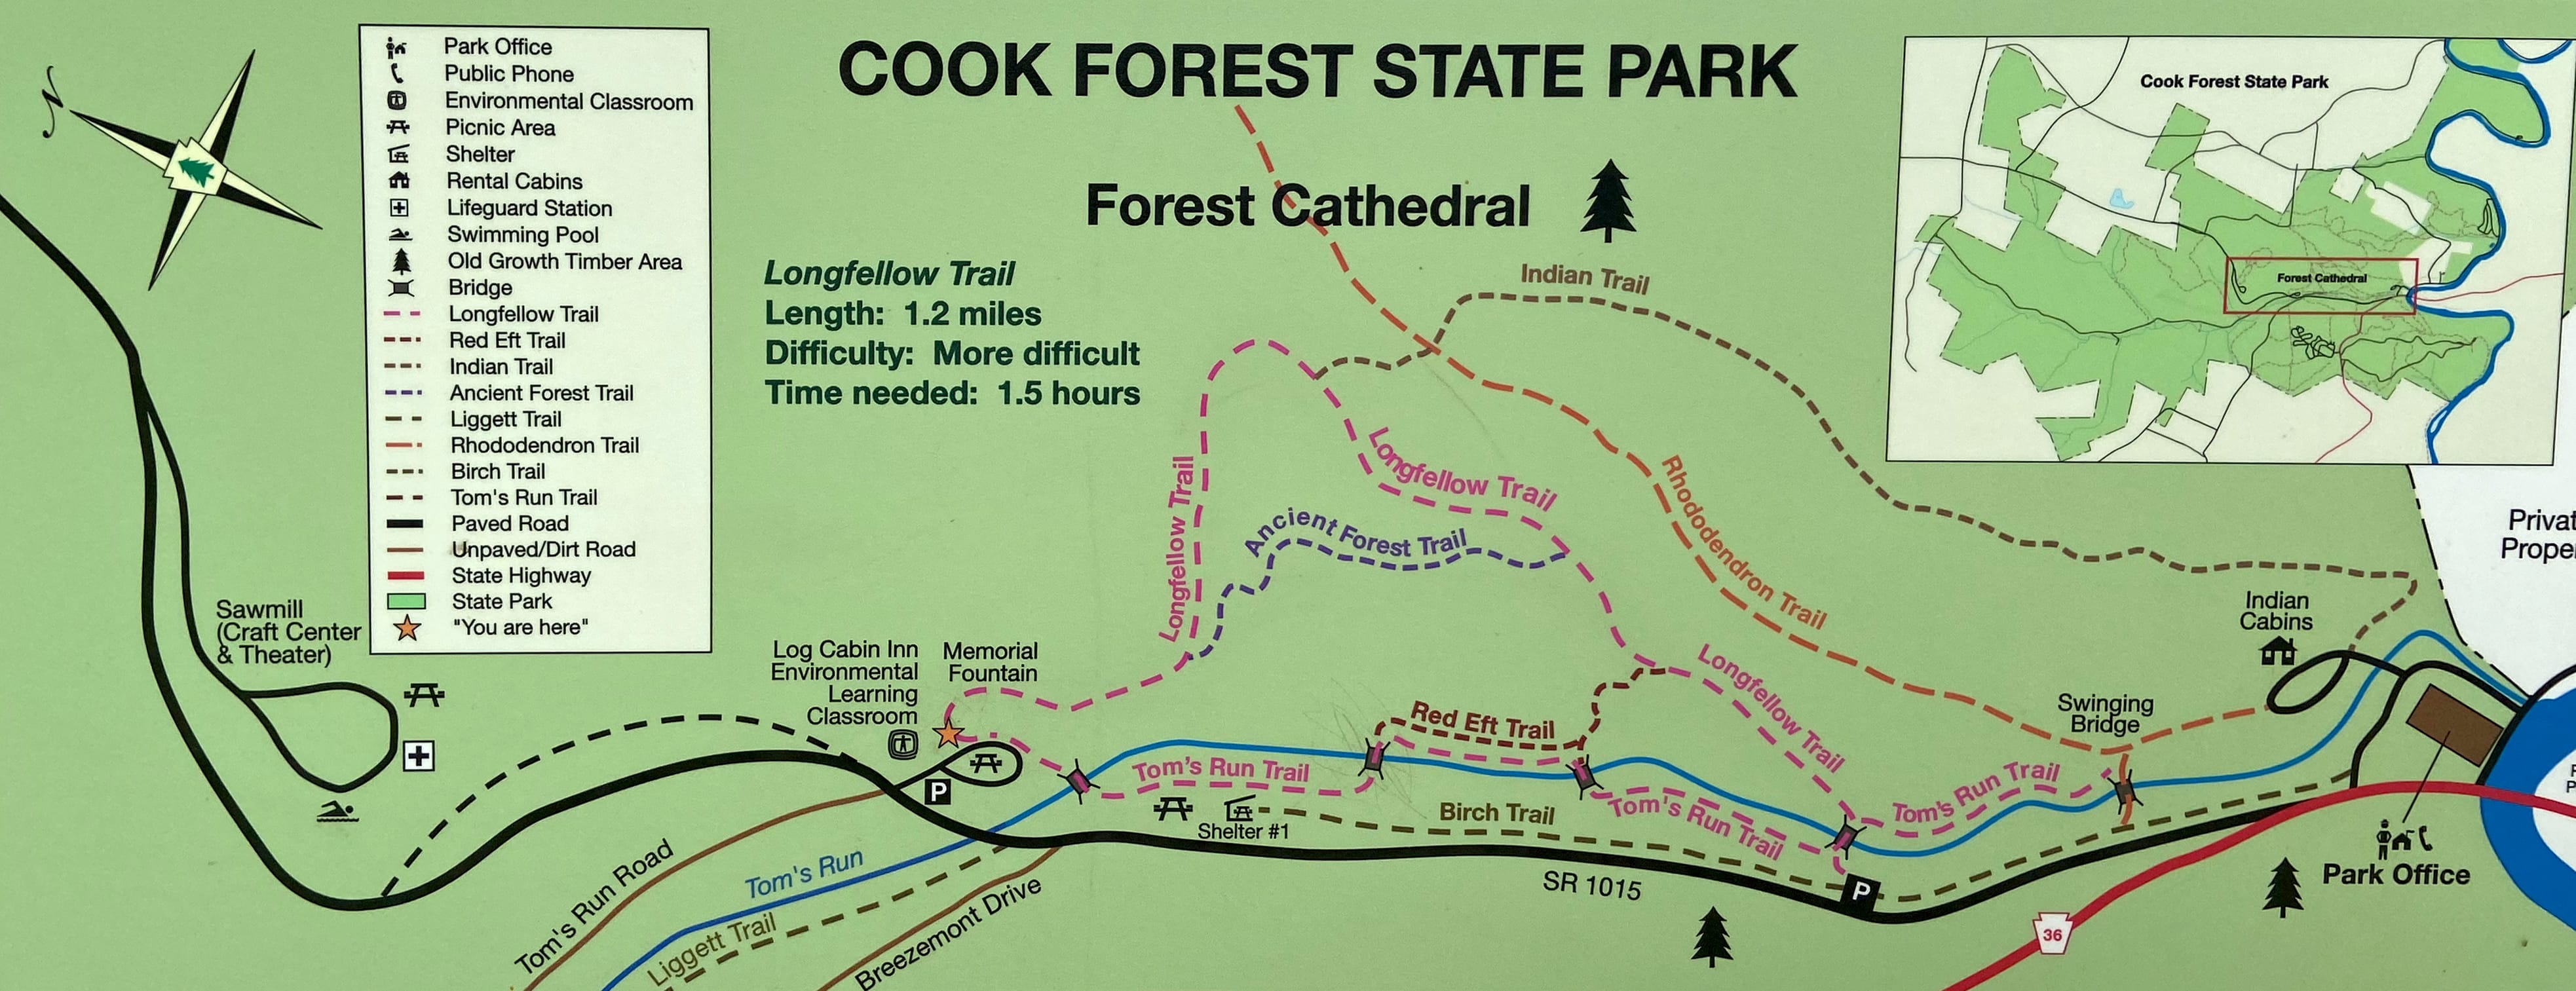 Forest Cathedral Trails– Cook Forest State Park 